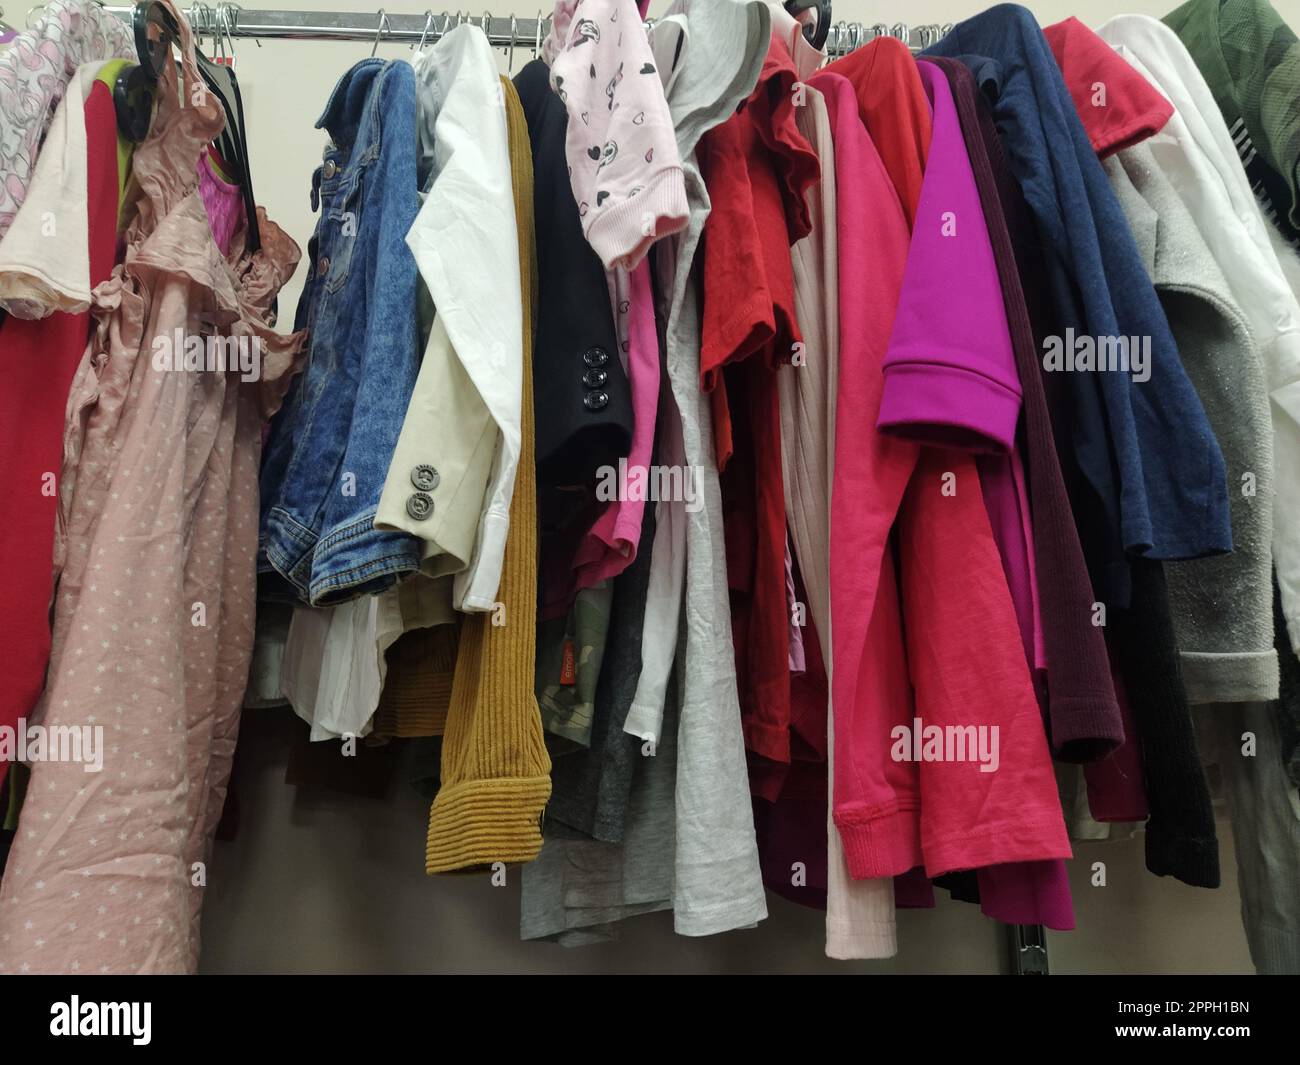 https://c8.alamy.com/comp/2PPH1BN/clothes-hung-on-hangers-assortment-of-second-hand-store-childrens-and-womens-shirts-blouses-sweaters-hanging-on-a-rack-ready-for-sale-to-customers-saving-money-belgrade-serbia-22-april-2022-2PPH1BN.jpg